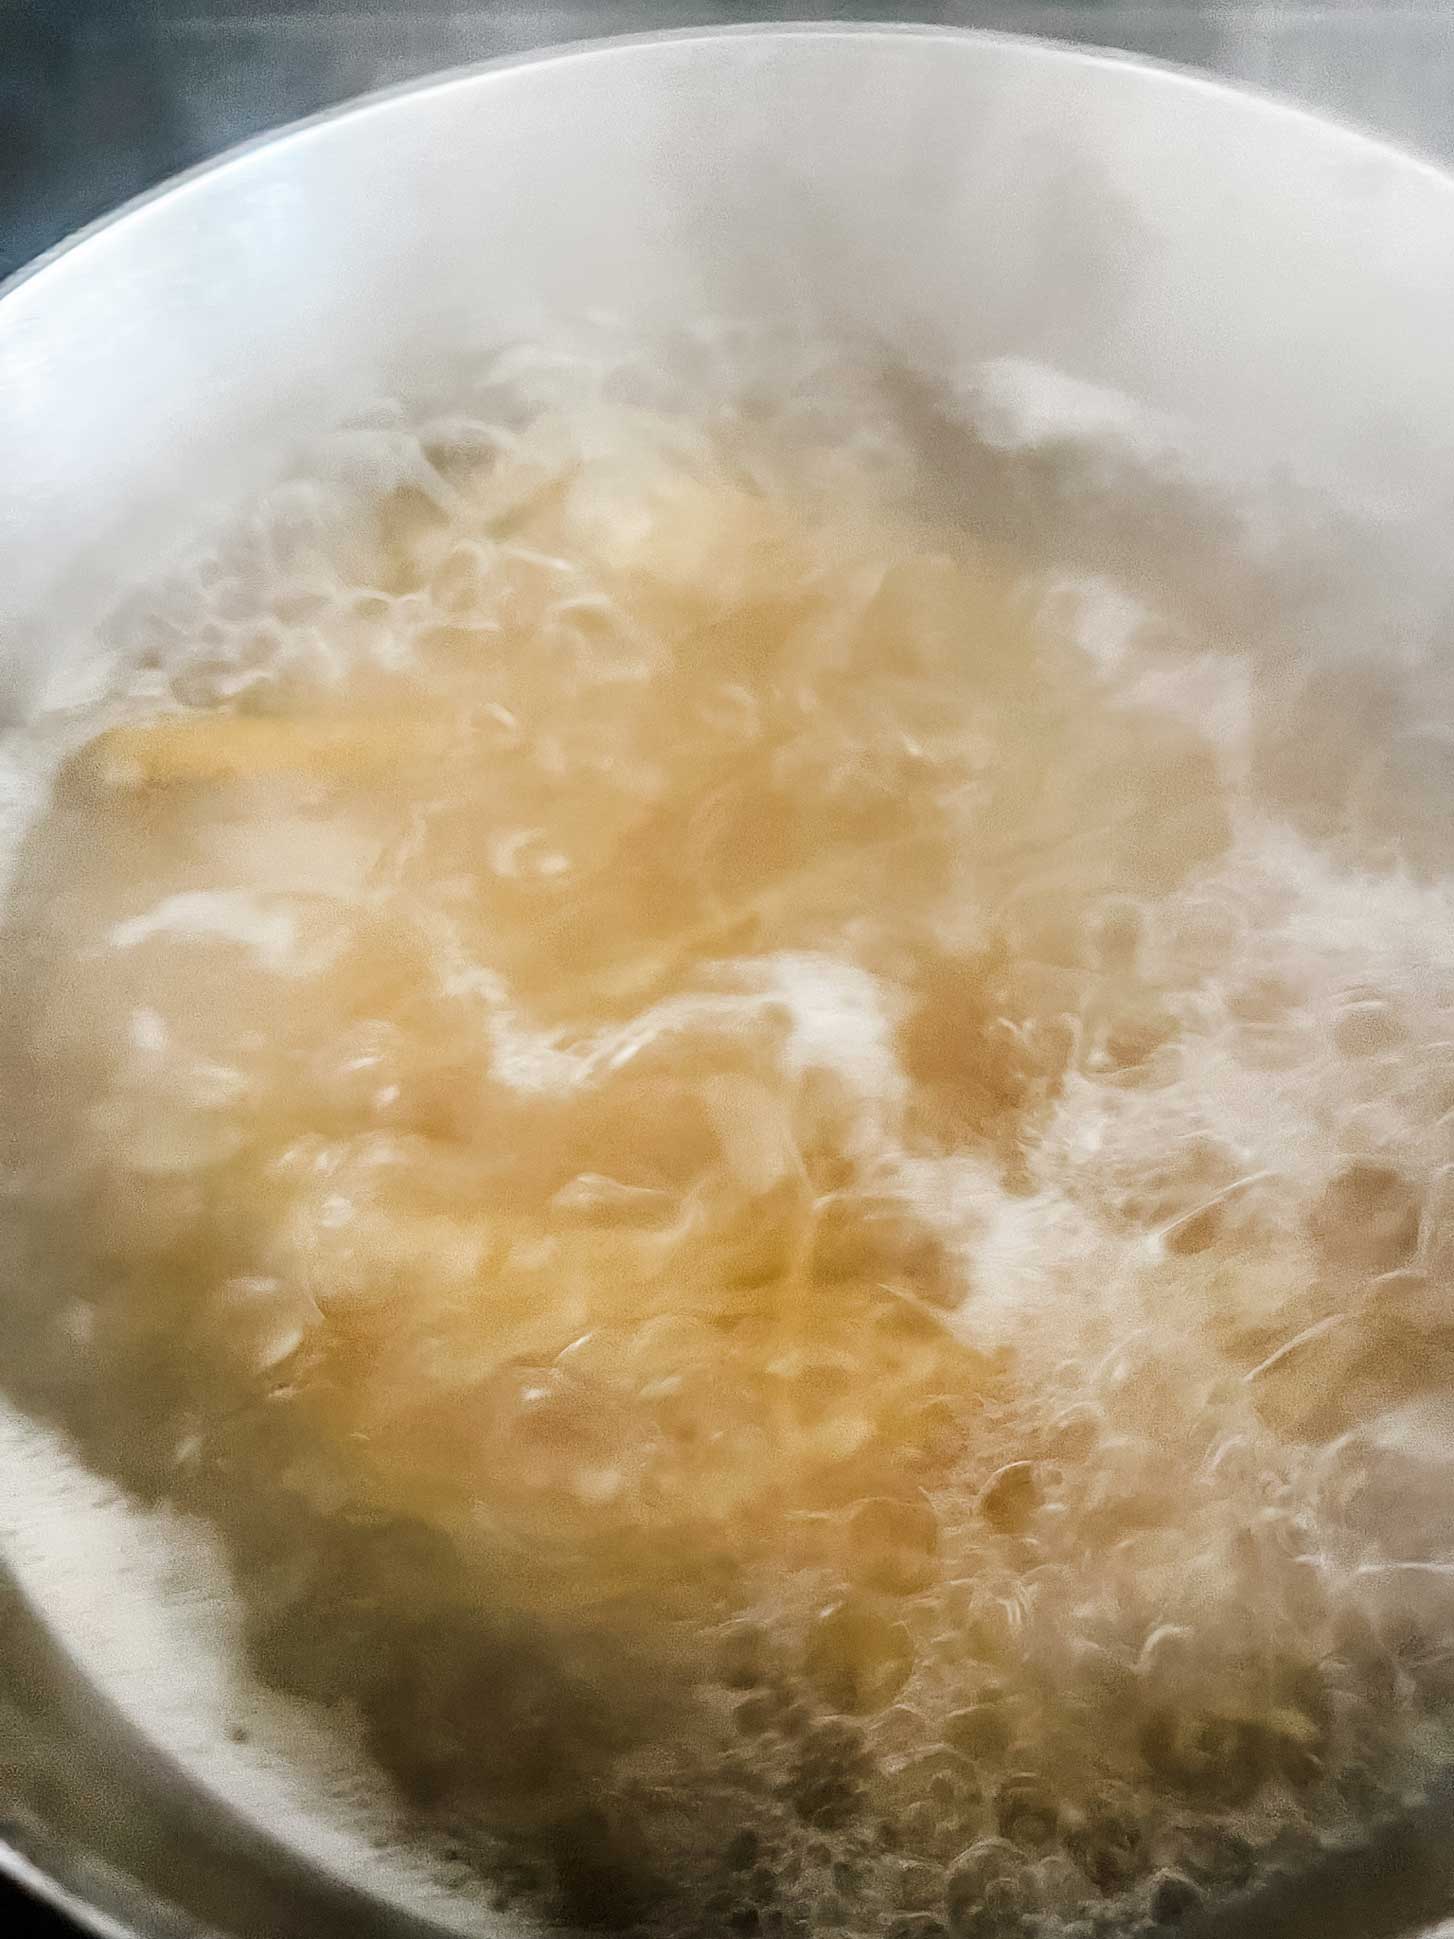 Spaghetti noodles boiling in a large pot of water.